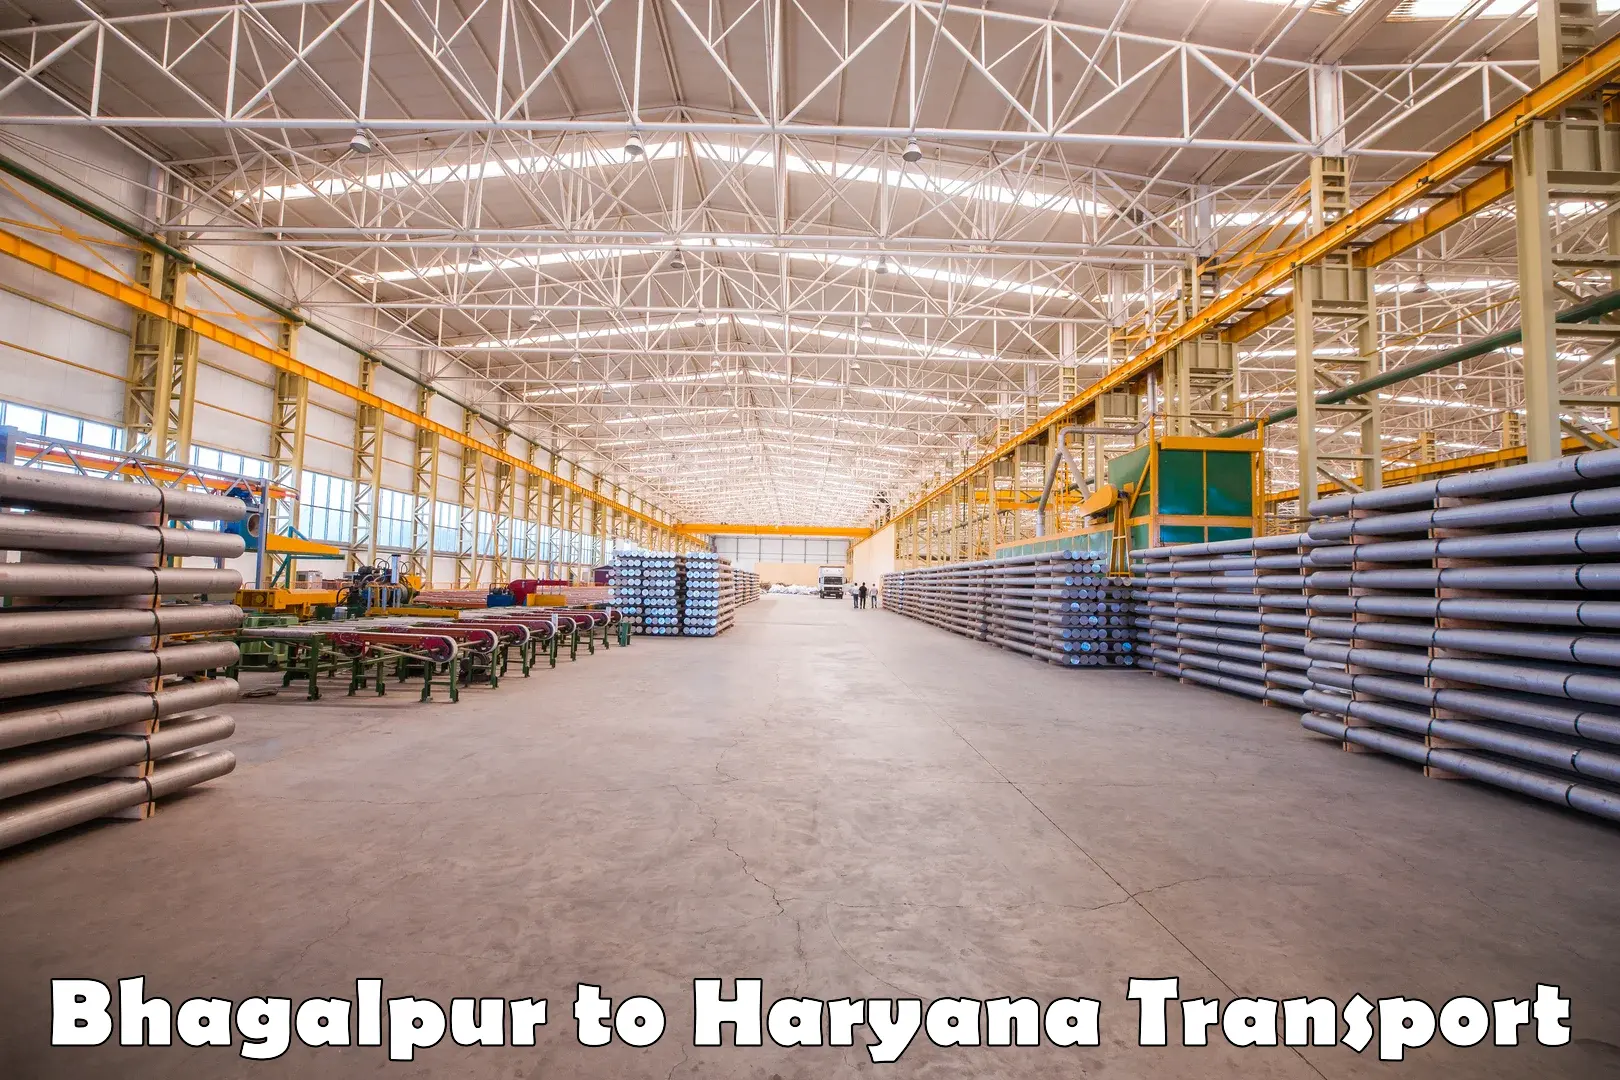 Goods delivery service Bhagalpur to Haryana